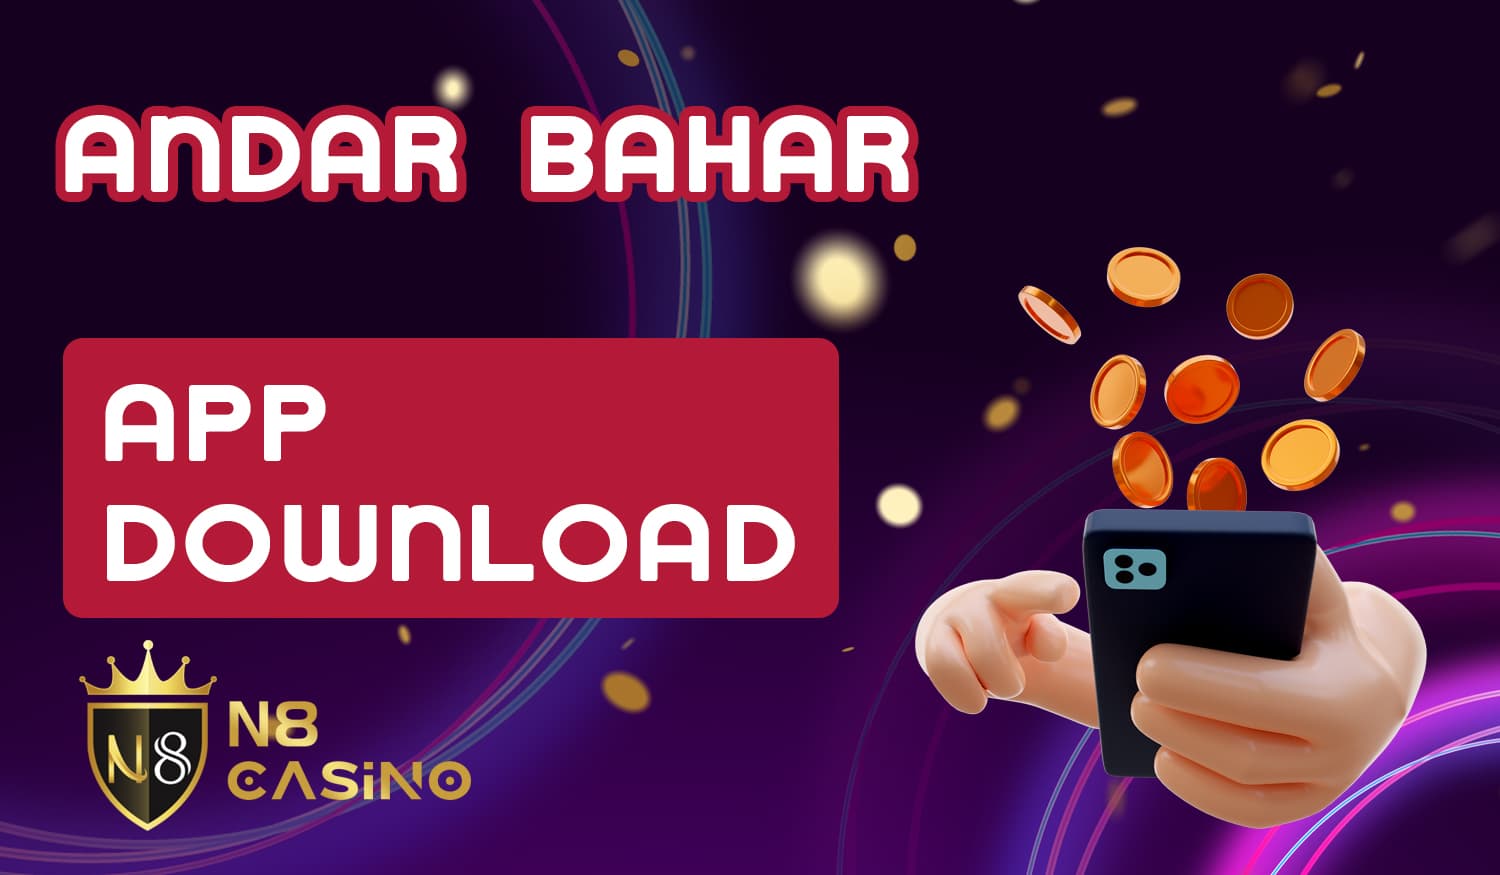 How to start playing Andar Bahar at N8 Casino with mobile app